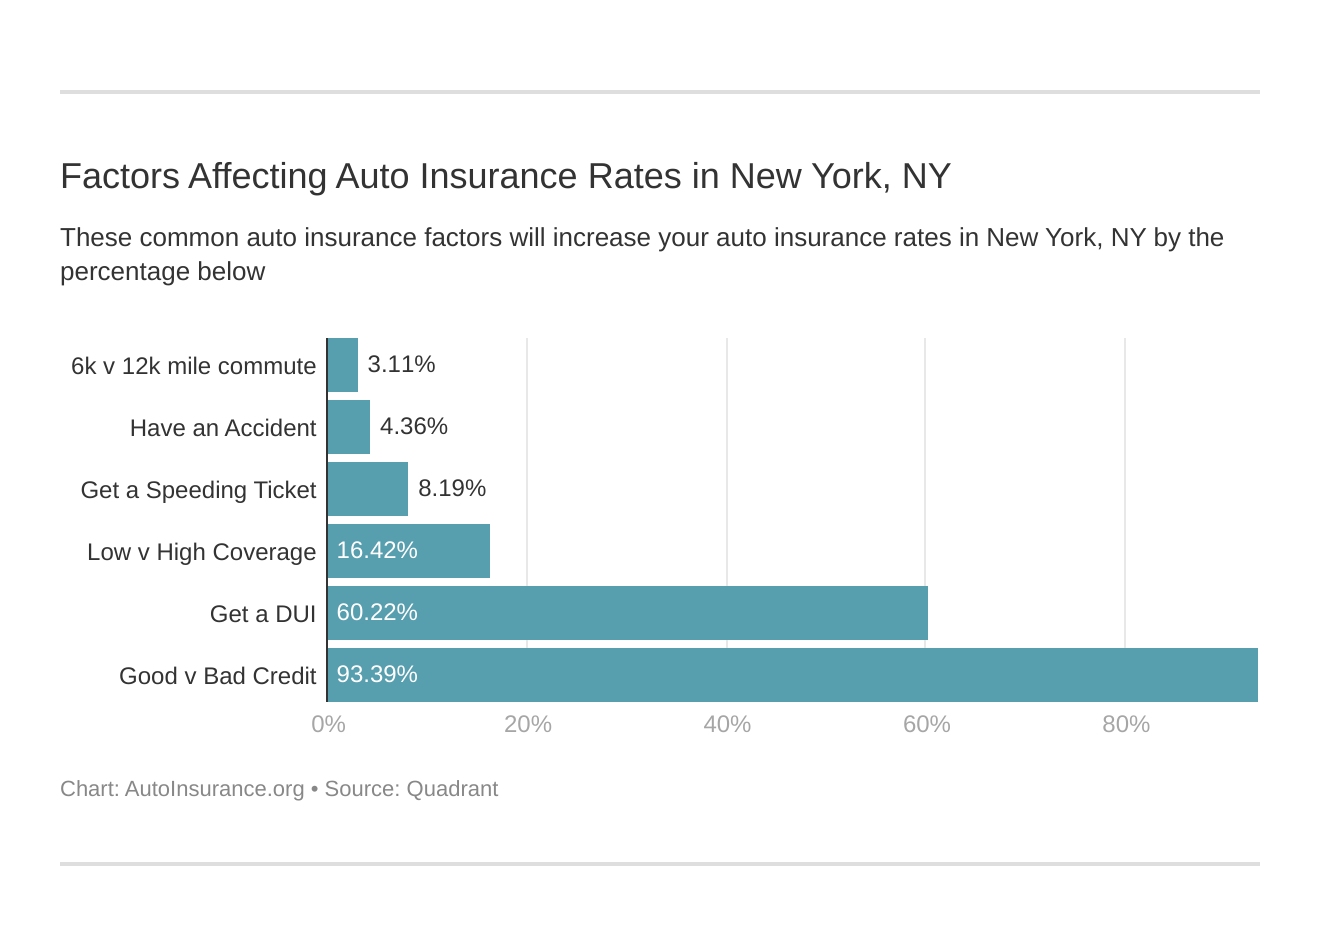 Factors Affecting Auto Insurance Rates in New York, NY